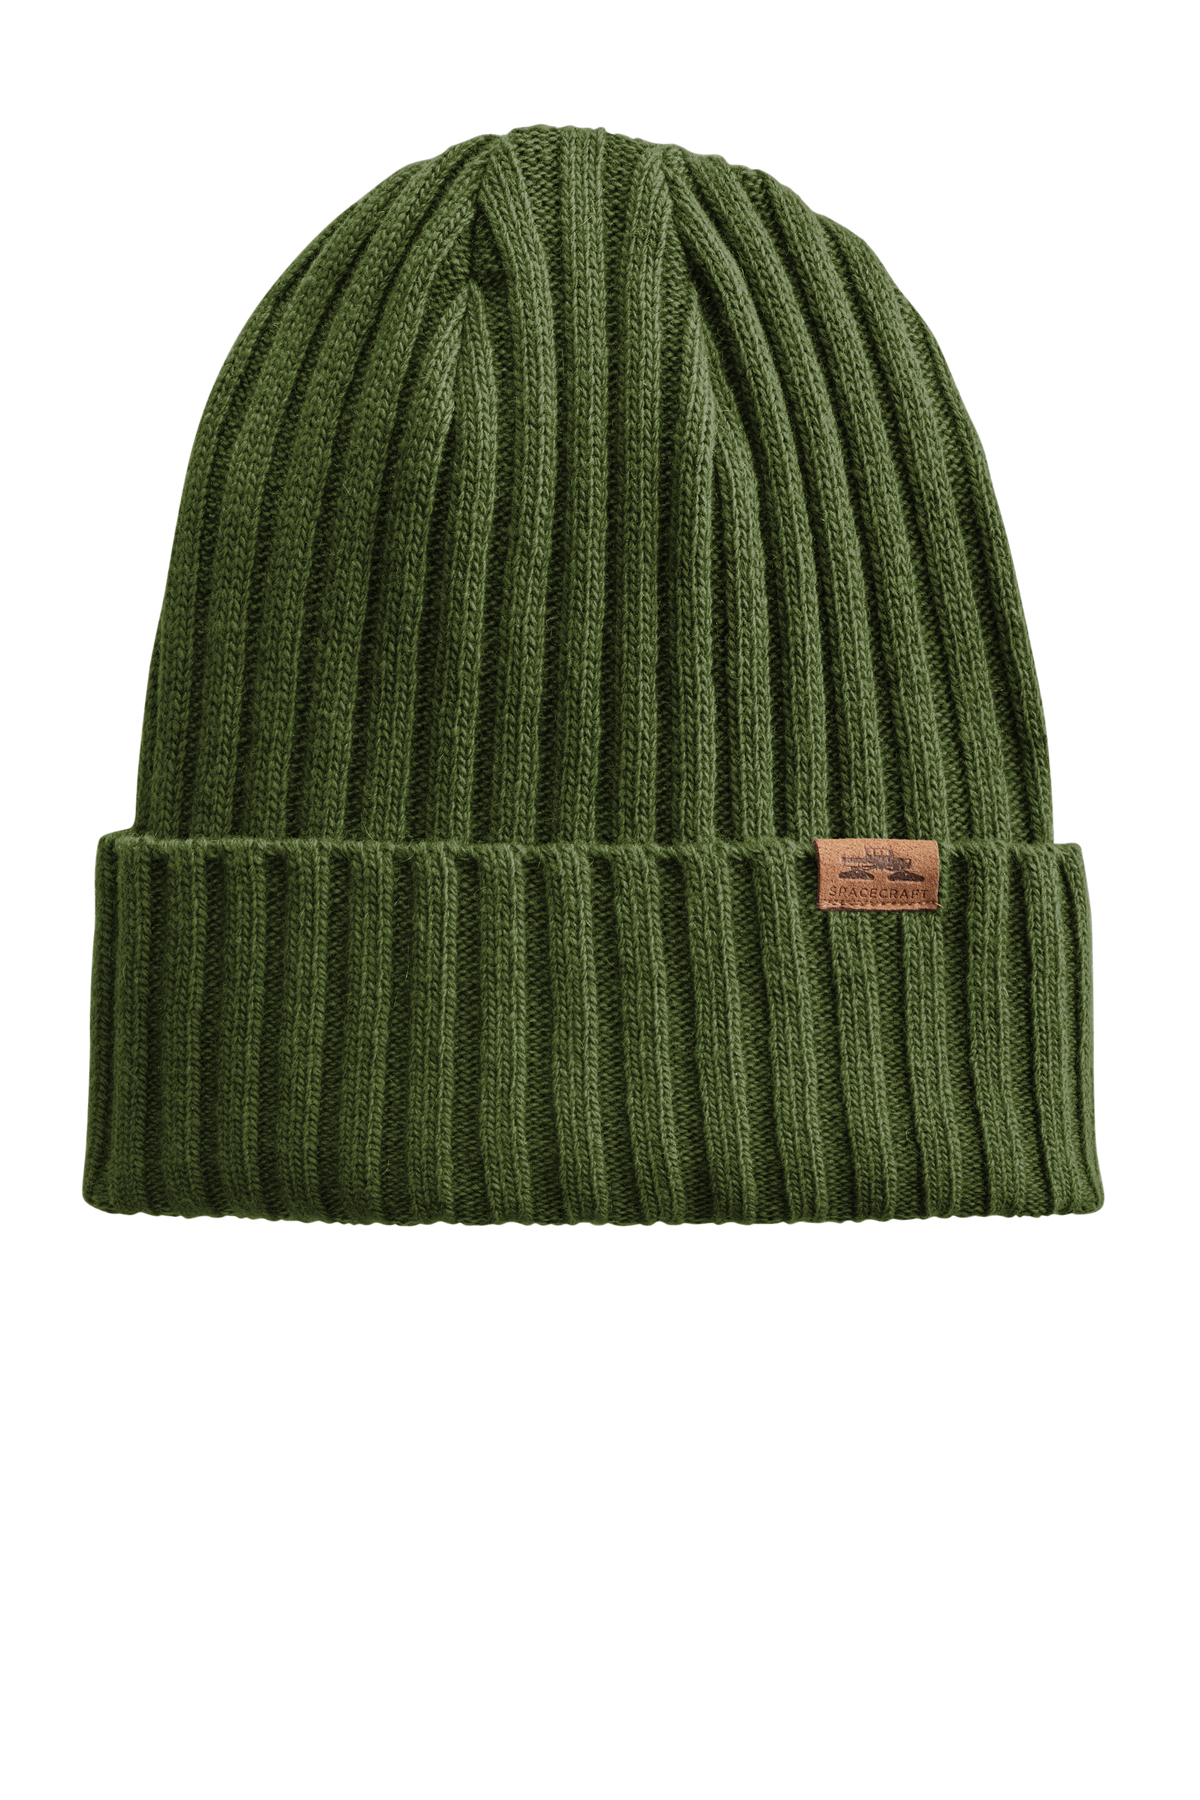 Spacecraft Square Knot Beanie | Product | SanMar